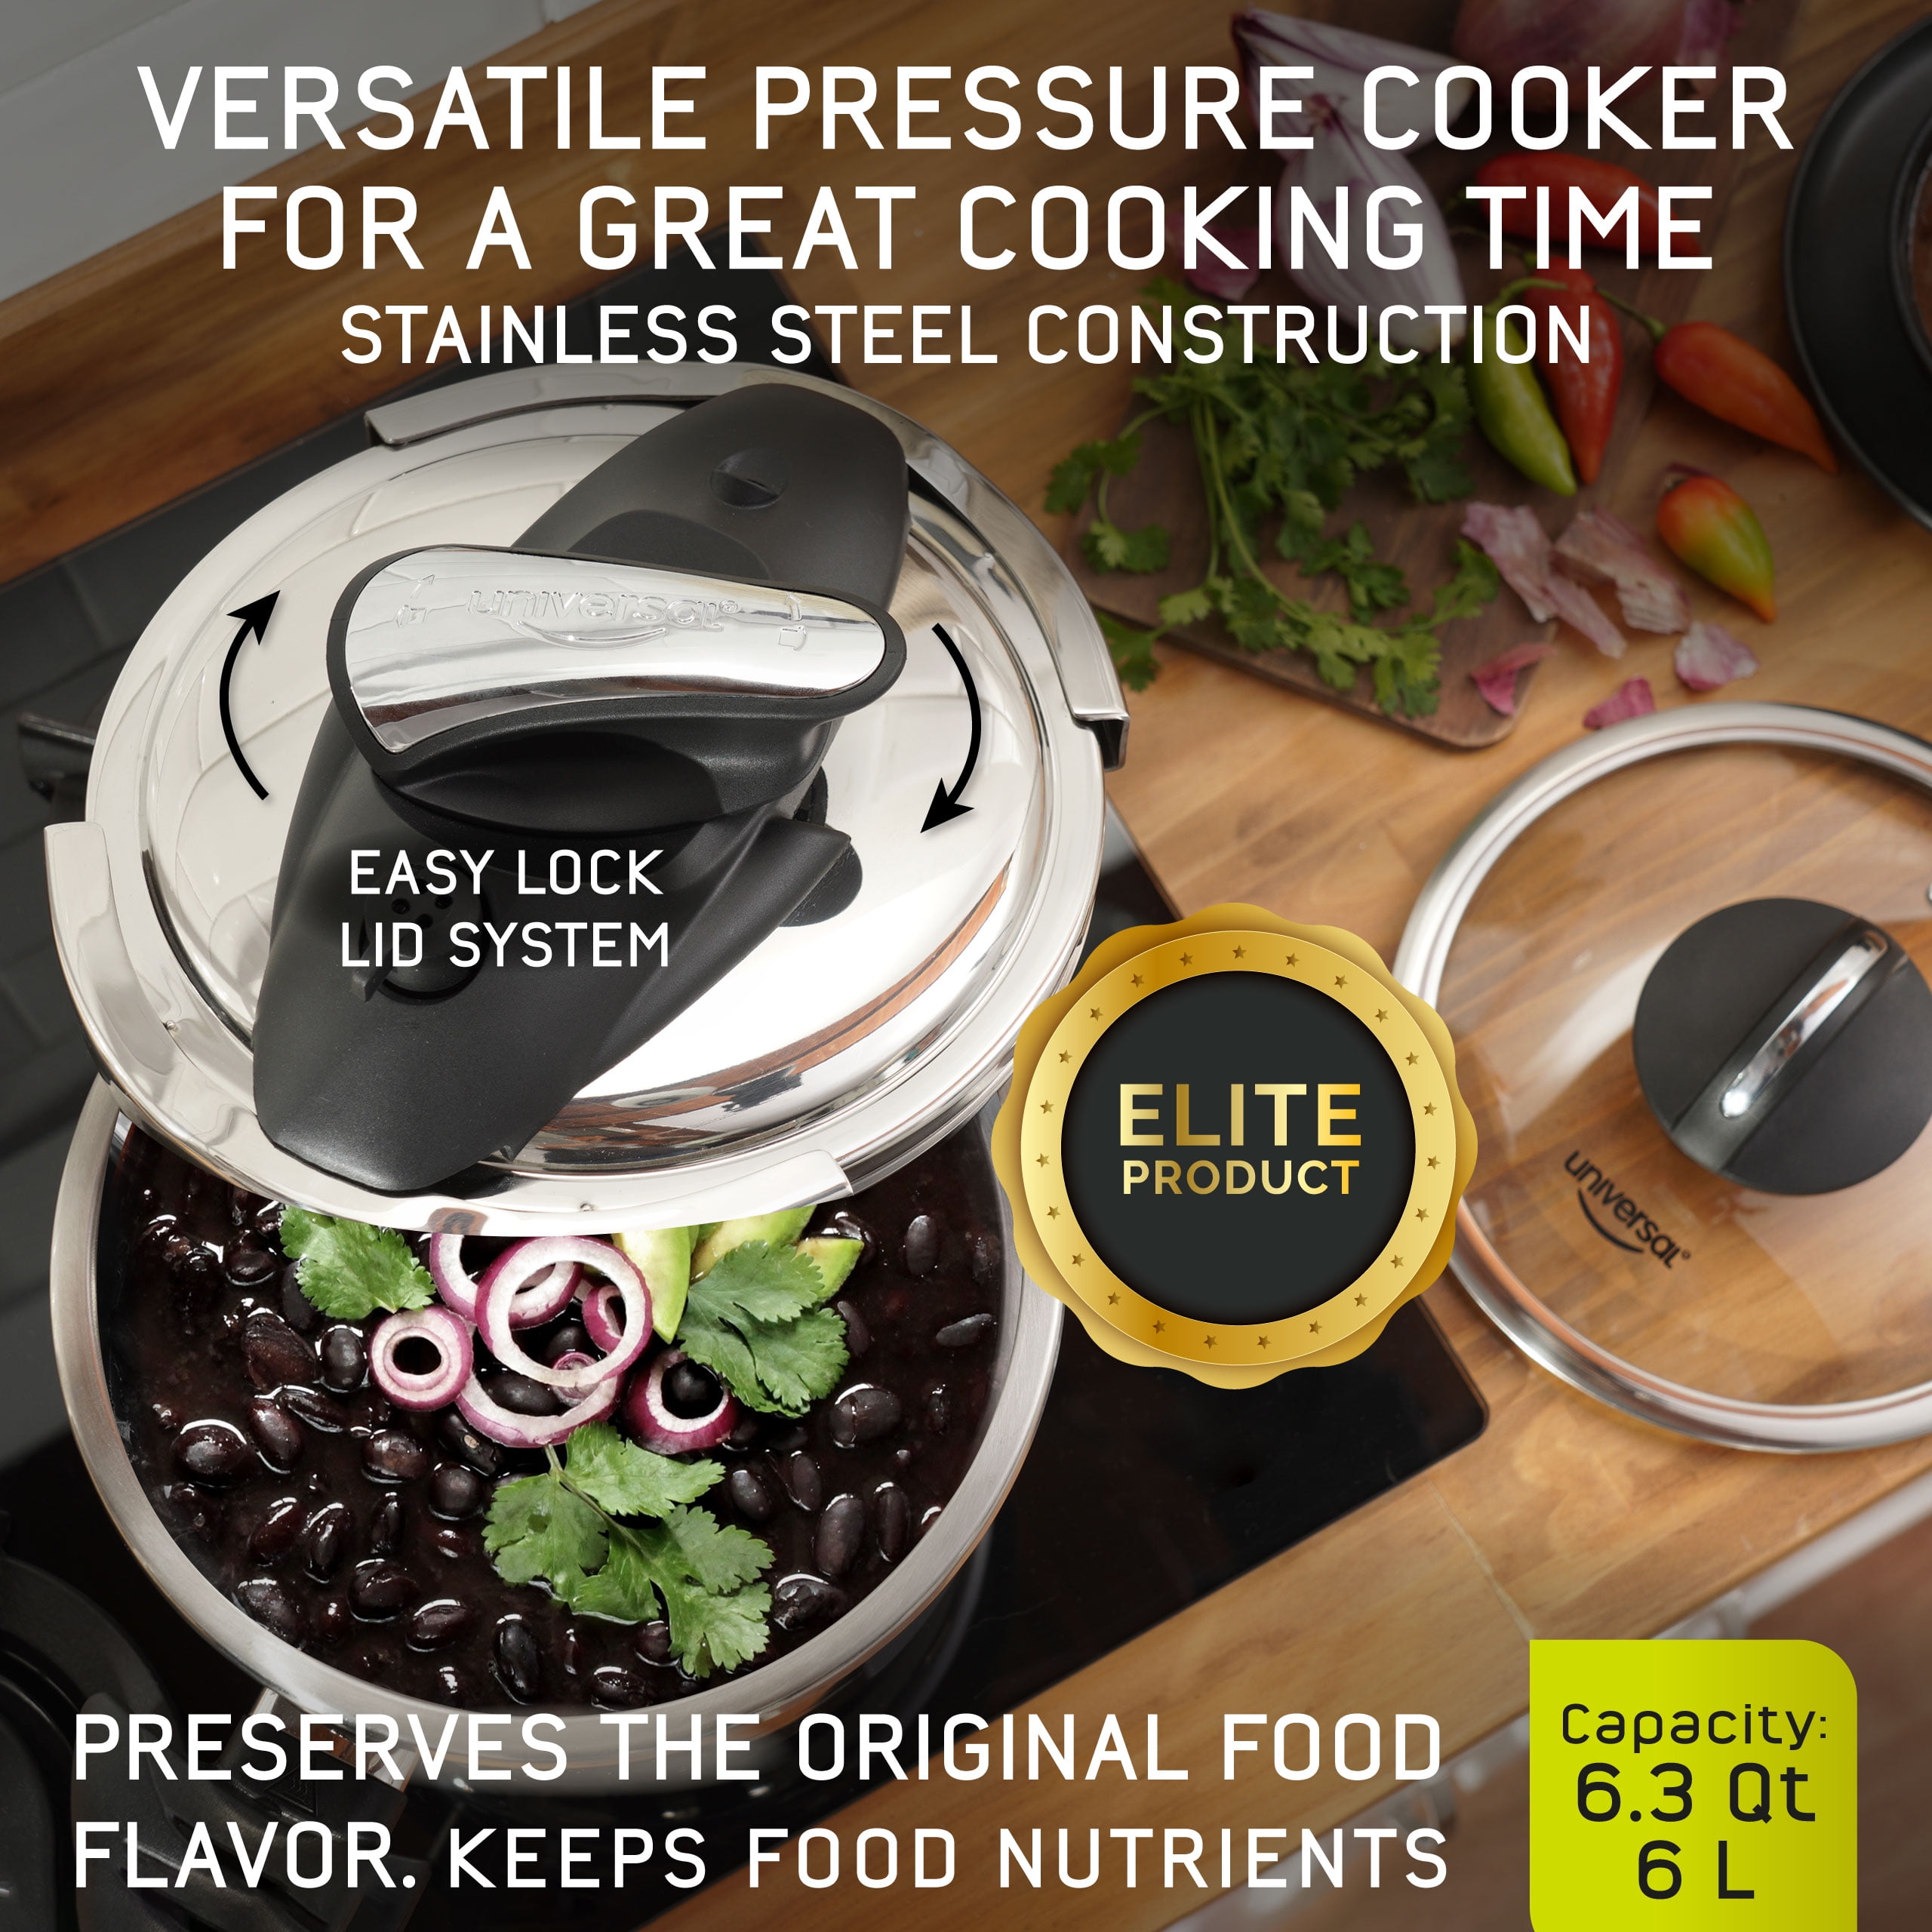 Dual-Use Gas Induction Pressure Cooker Soup Cooker Universal Pot Stainless  Steel Mini Pressure Cooker Safe And Easy To Clean